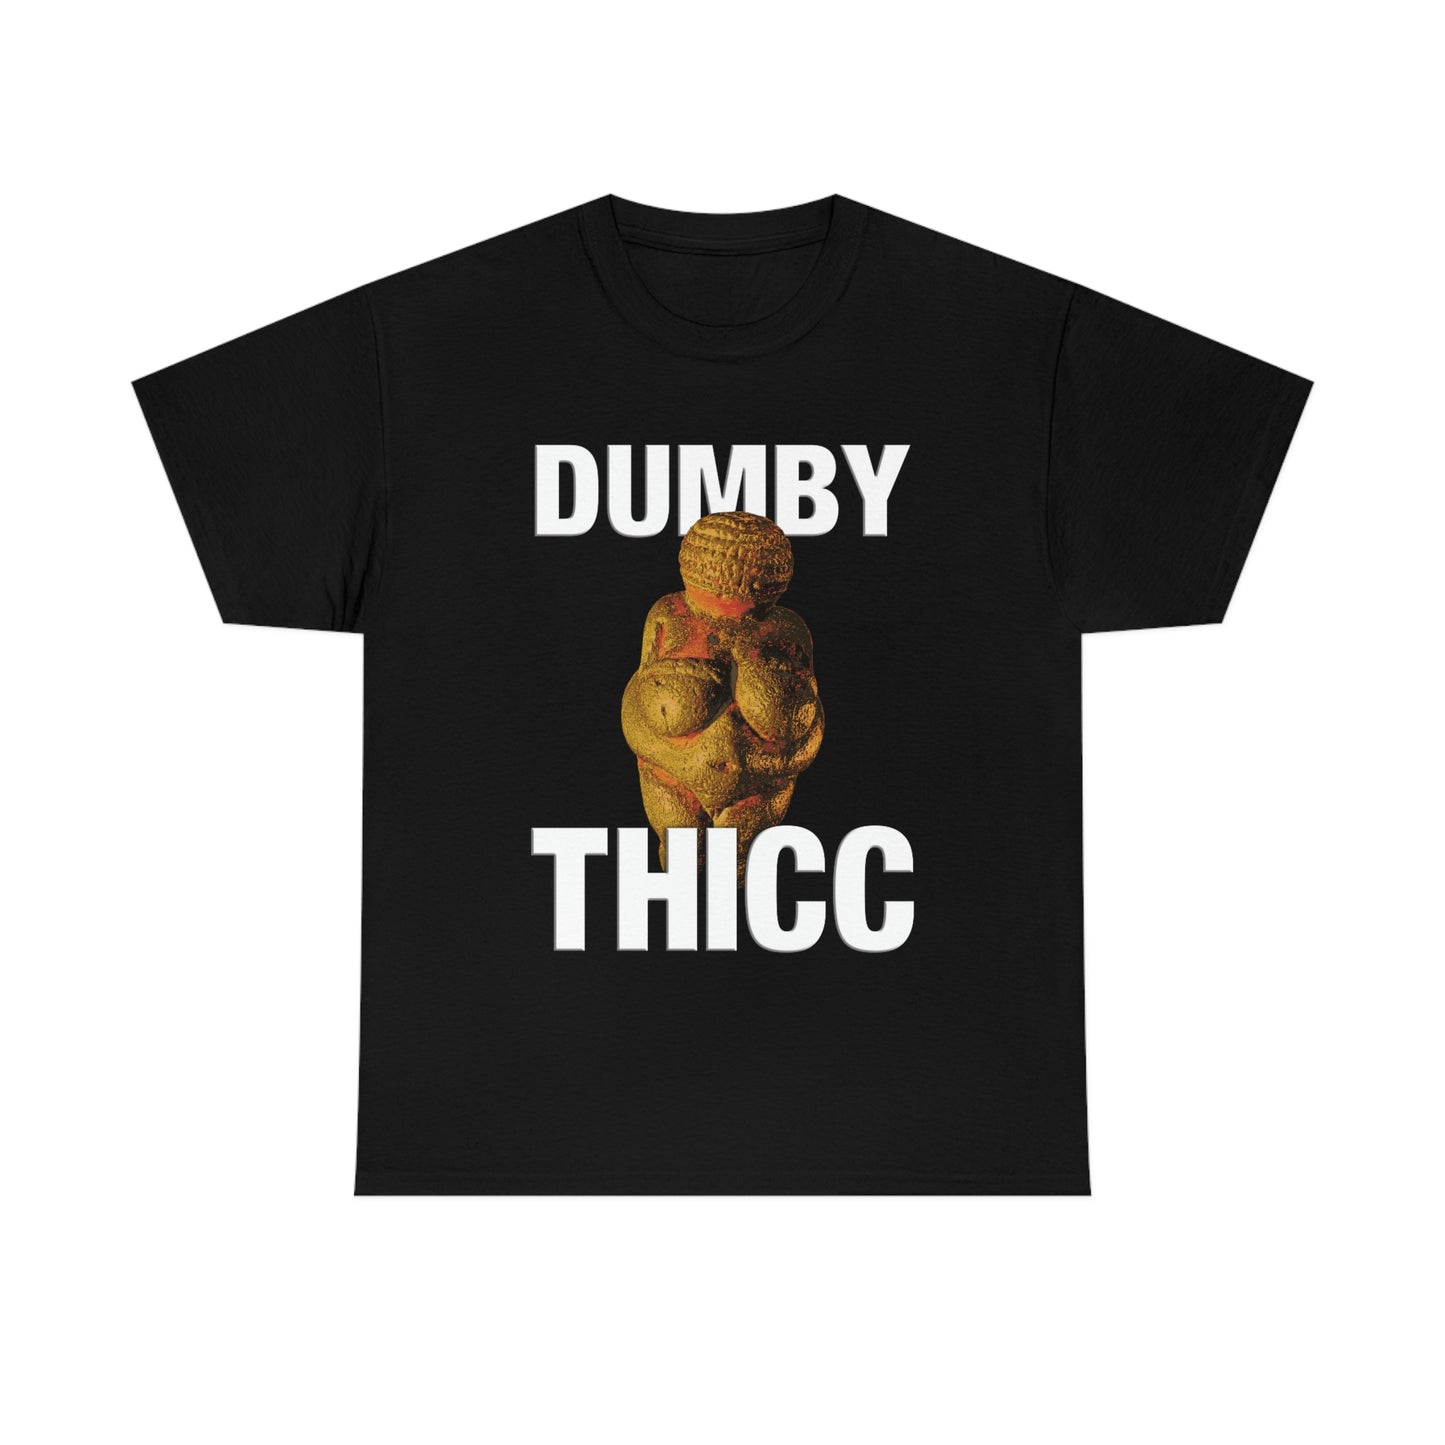 Dumby Thicc.